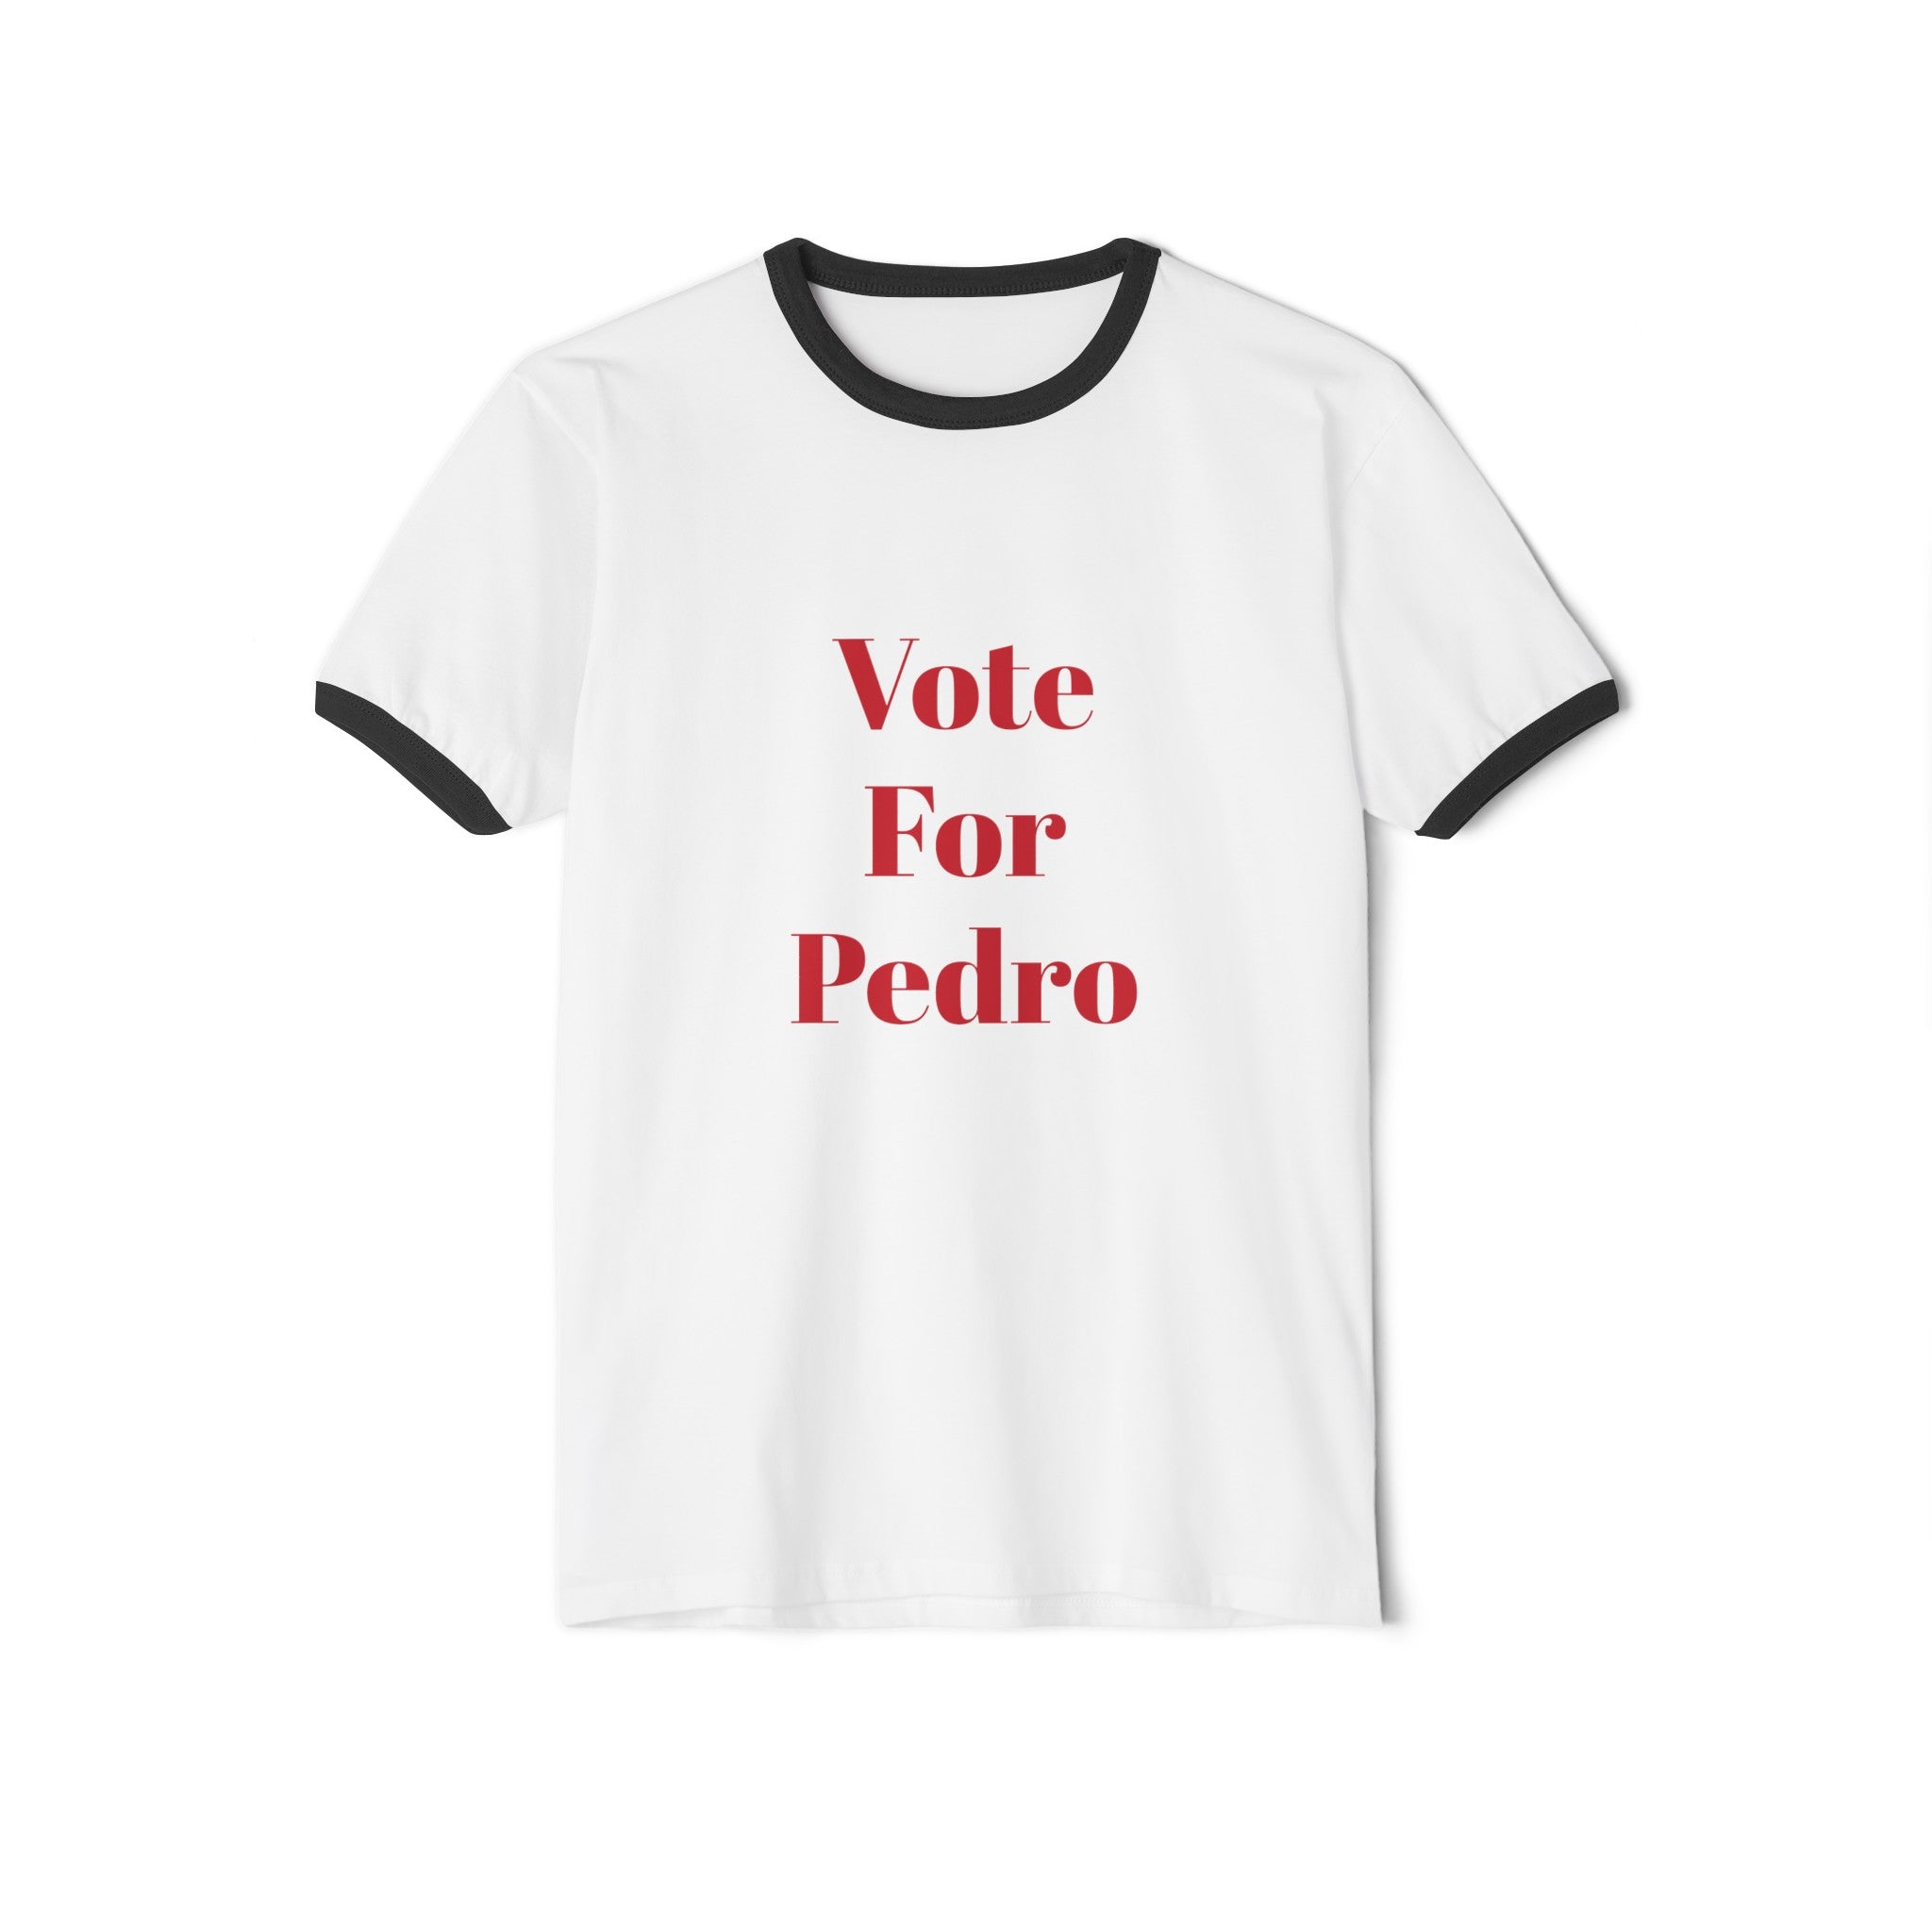 The image features a stylish unisex cotton ringer t-shirt, showcasing the bold "Vote For Pedro" slogan across the front. The contrasting trim on the collar and cuffs highlights the classic ringer style, while the soft cotton fabric promises comfort and a relaxed fit.